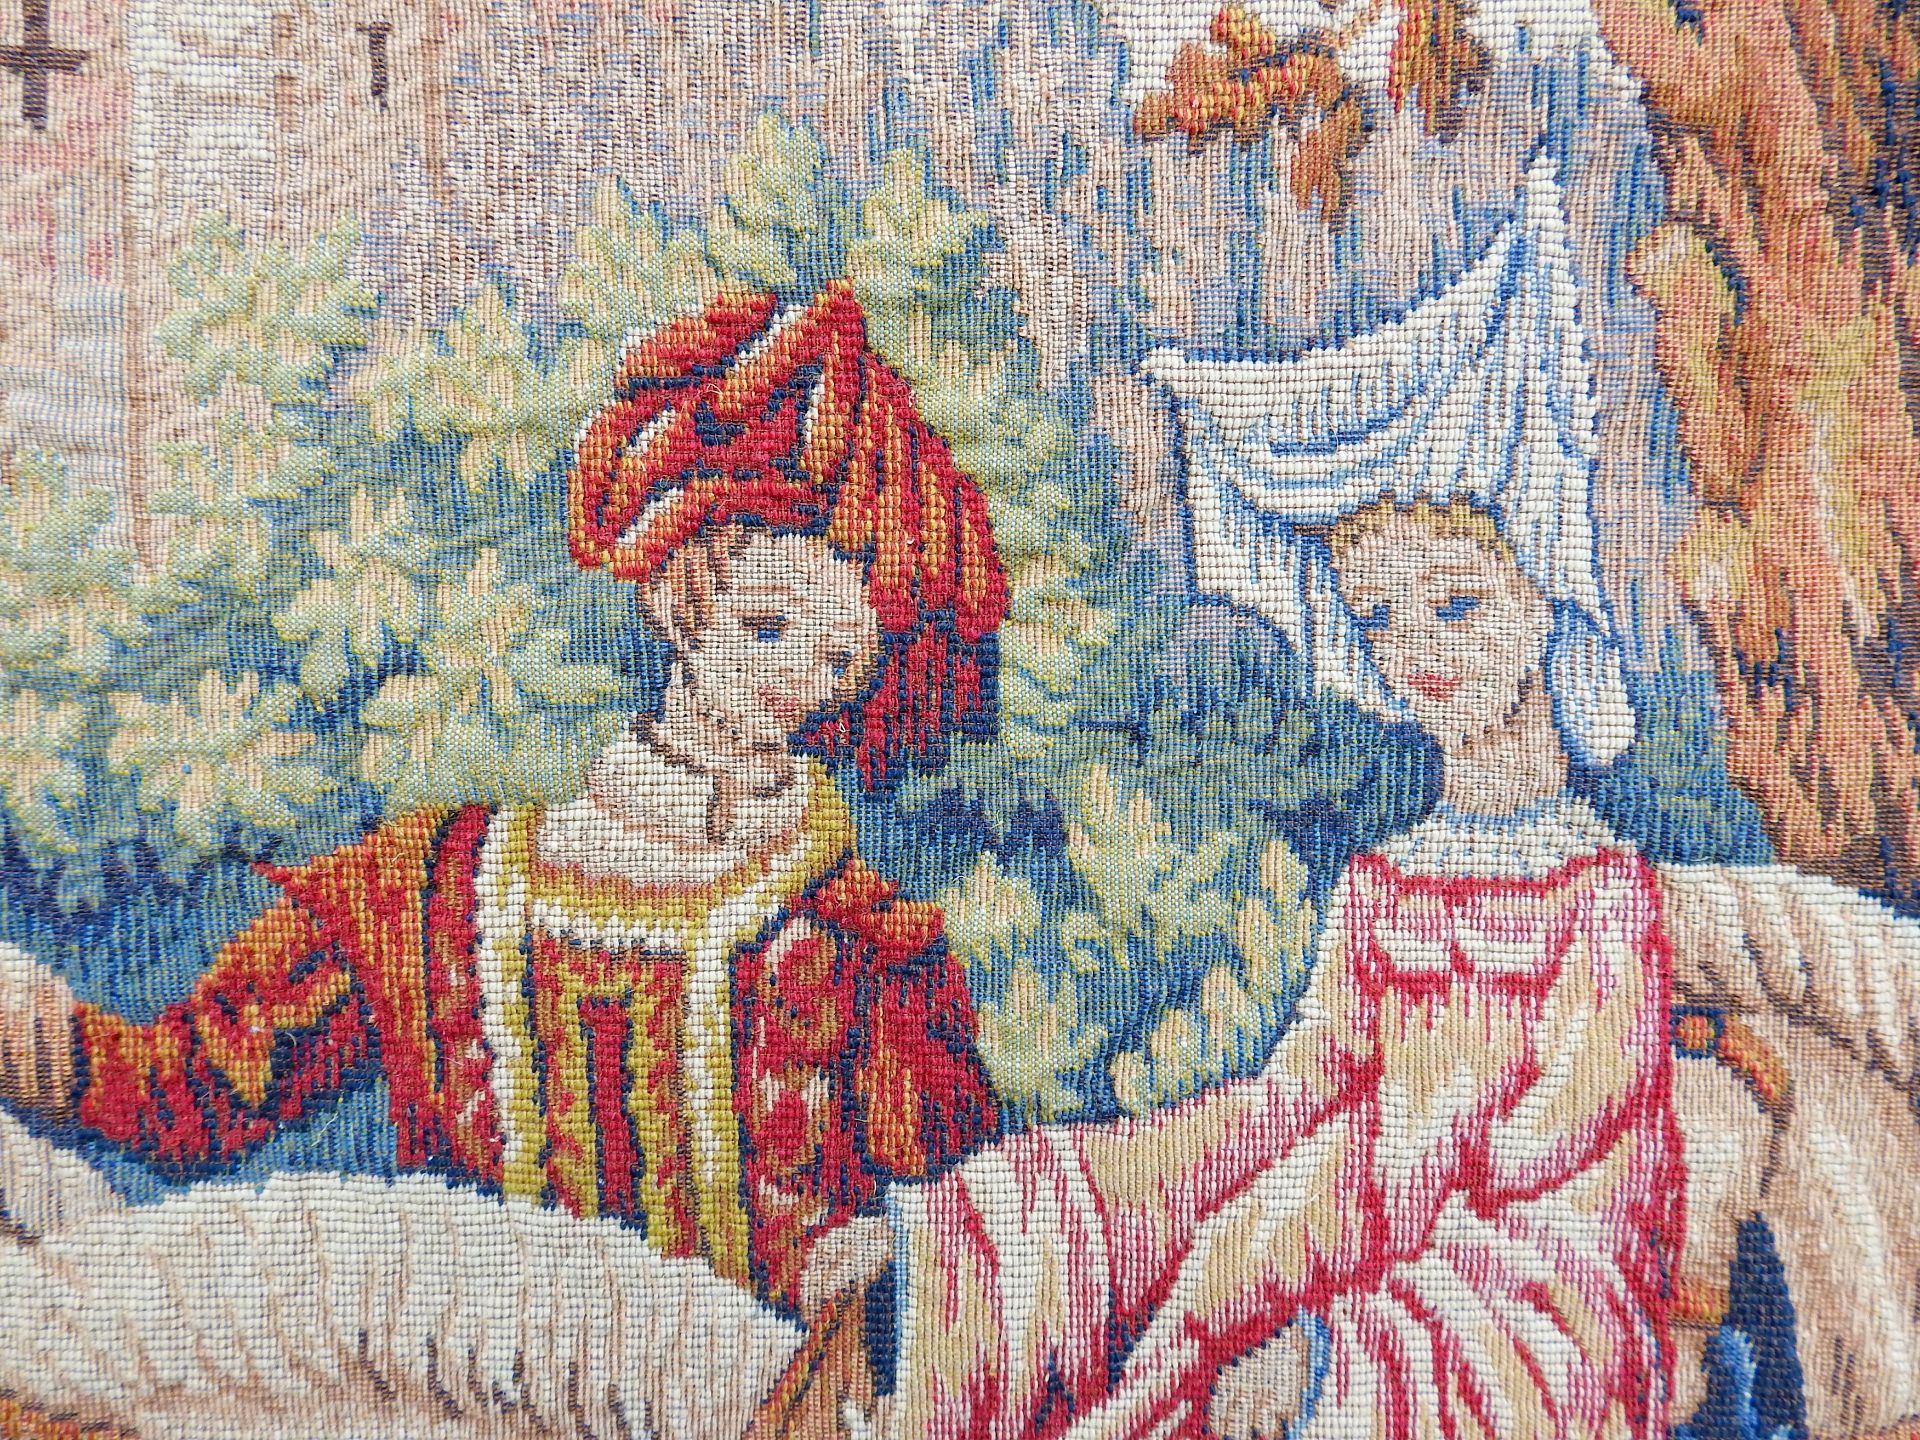 Aubusson-Teppich - Image 3 of 3